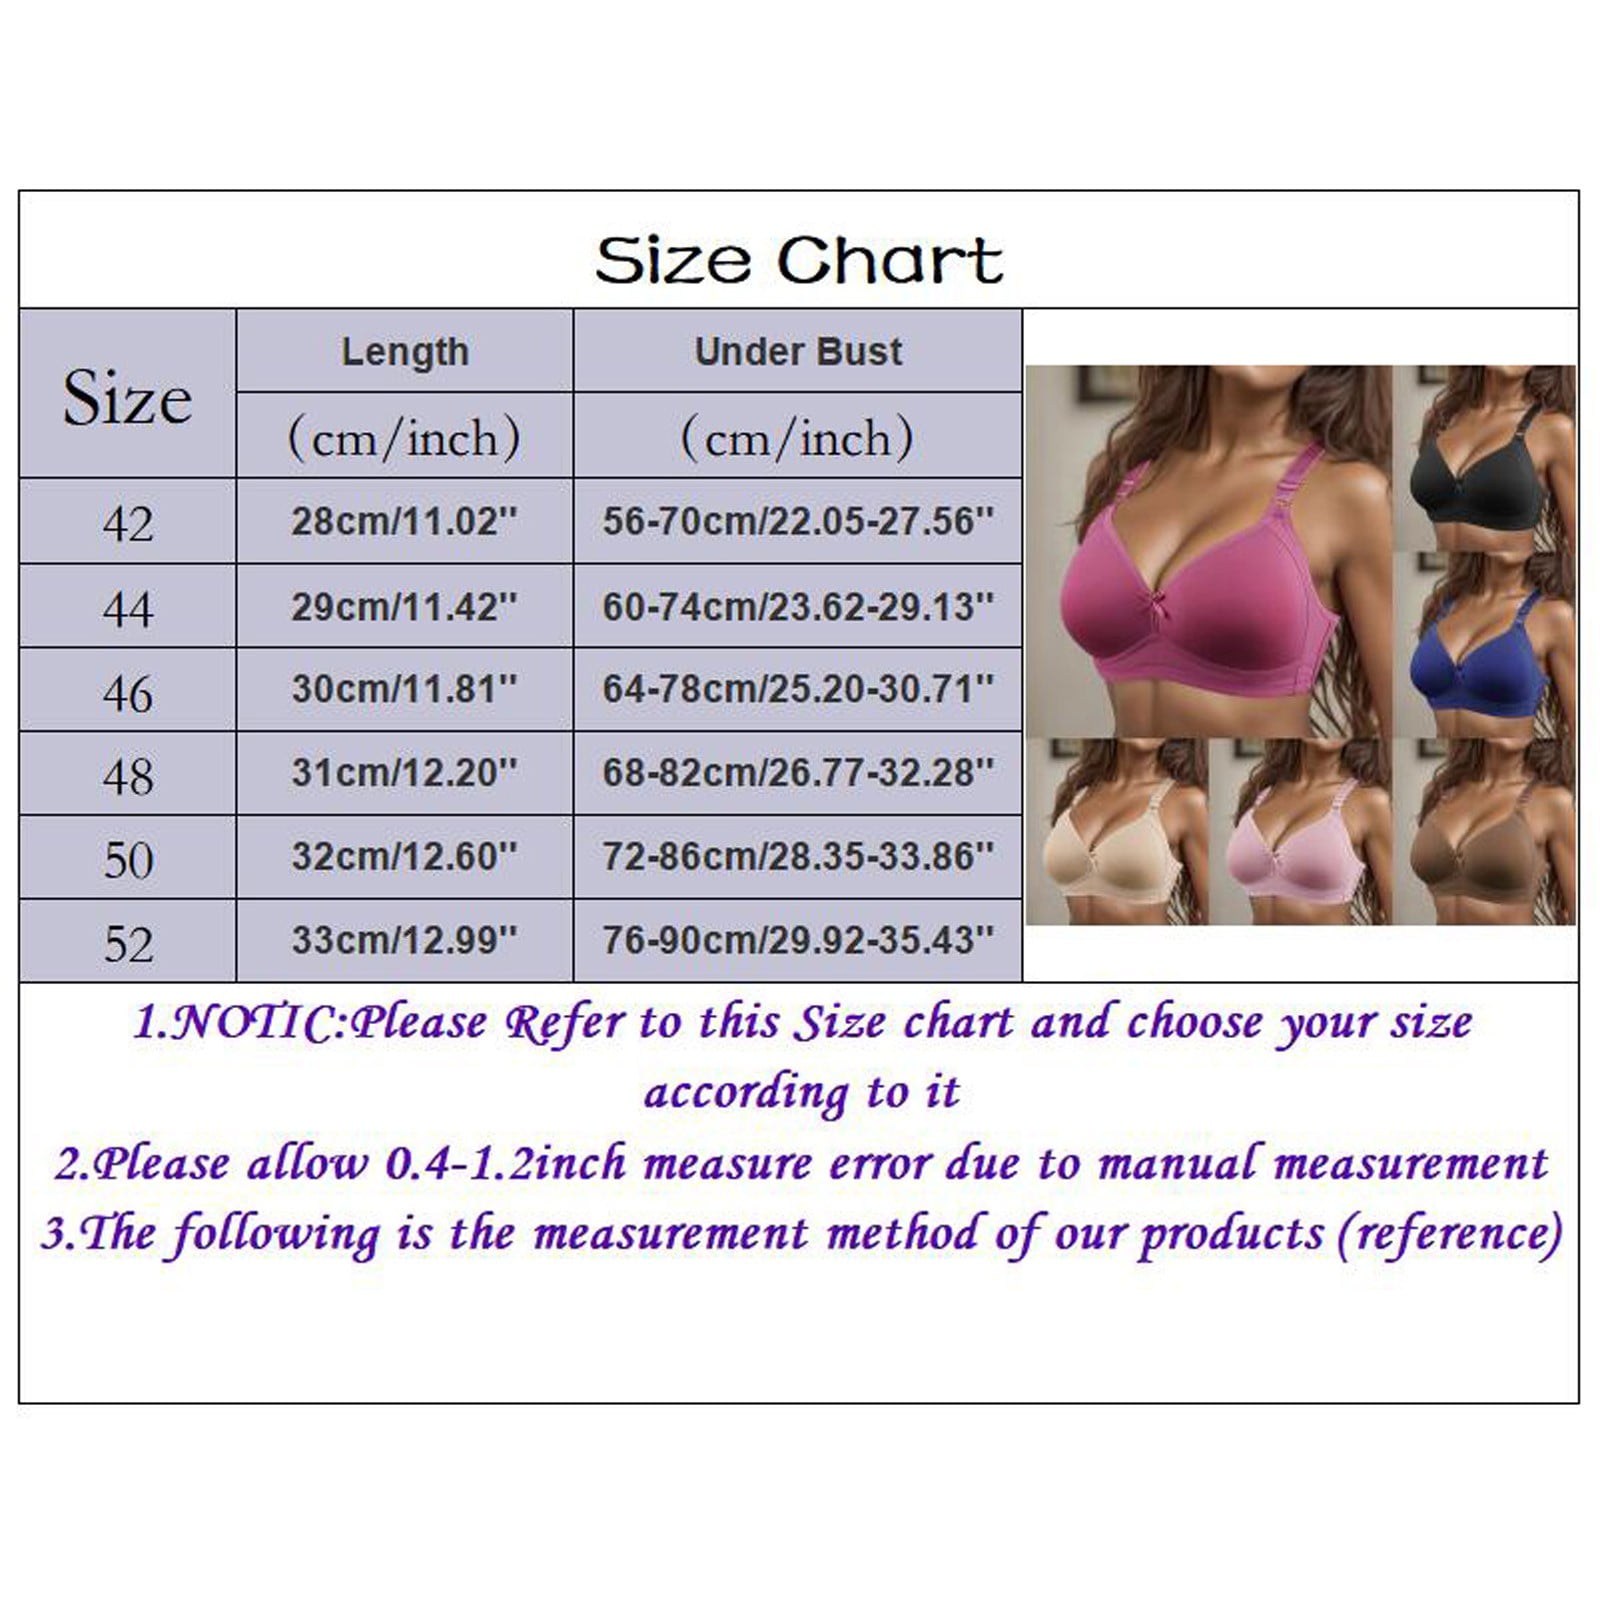 Fsqjgq Plus Size Bra for Women Push up Gathered Lace Brassiere Crop Tops  Bow Bras Adjustable Underwear Breathable Padded Lingerie Pink 85B